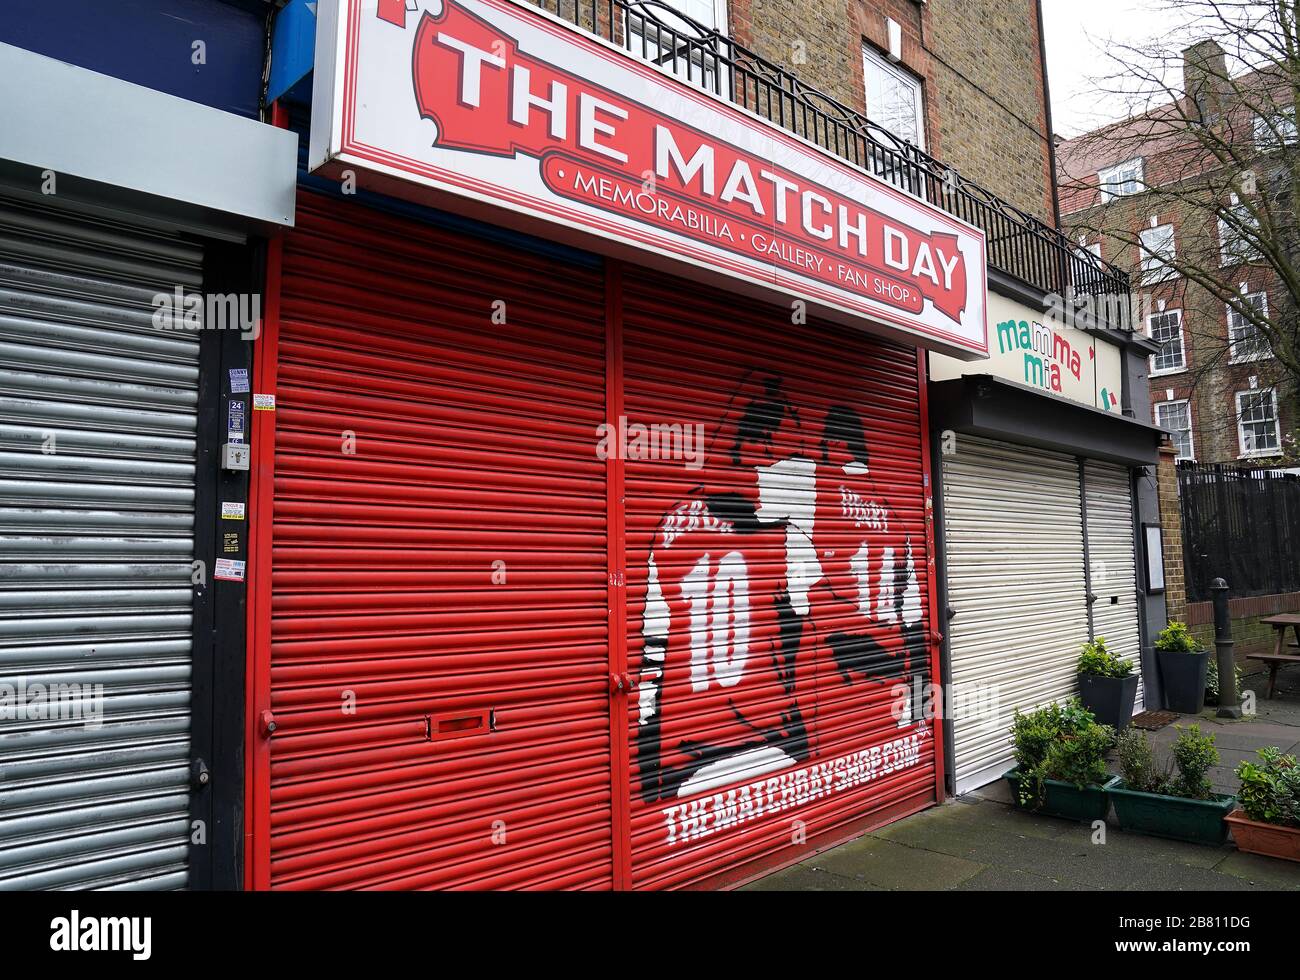 Er velkendte Relaterede repræsentant The Match Day Memorabilia Shop near the Emirates Stadium, home of Arsenal.  Premier League clubs will gather via conference call on Thursday morning to  discuss fixtures and finances amid the coronavirus pandemic.